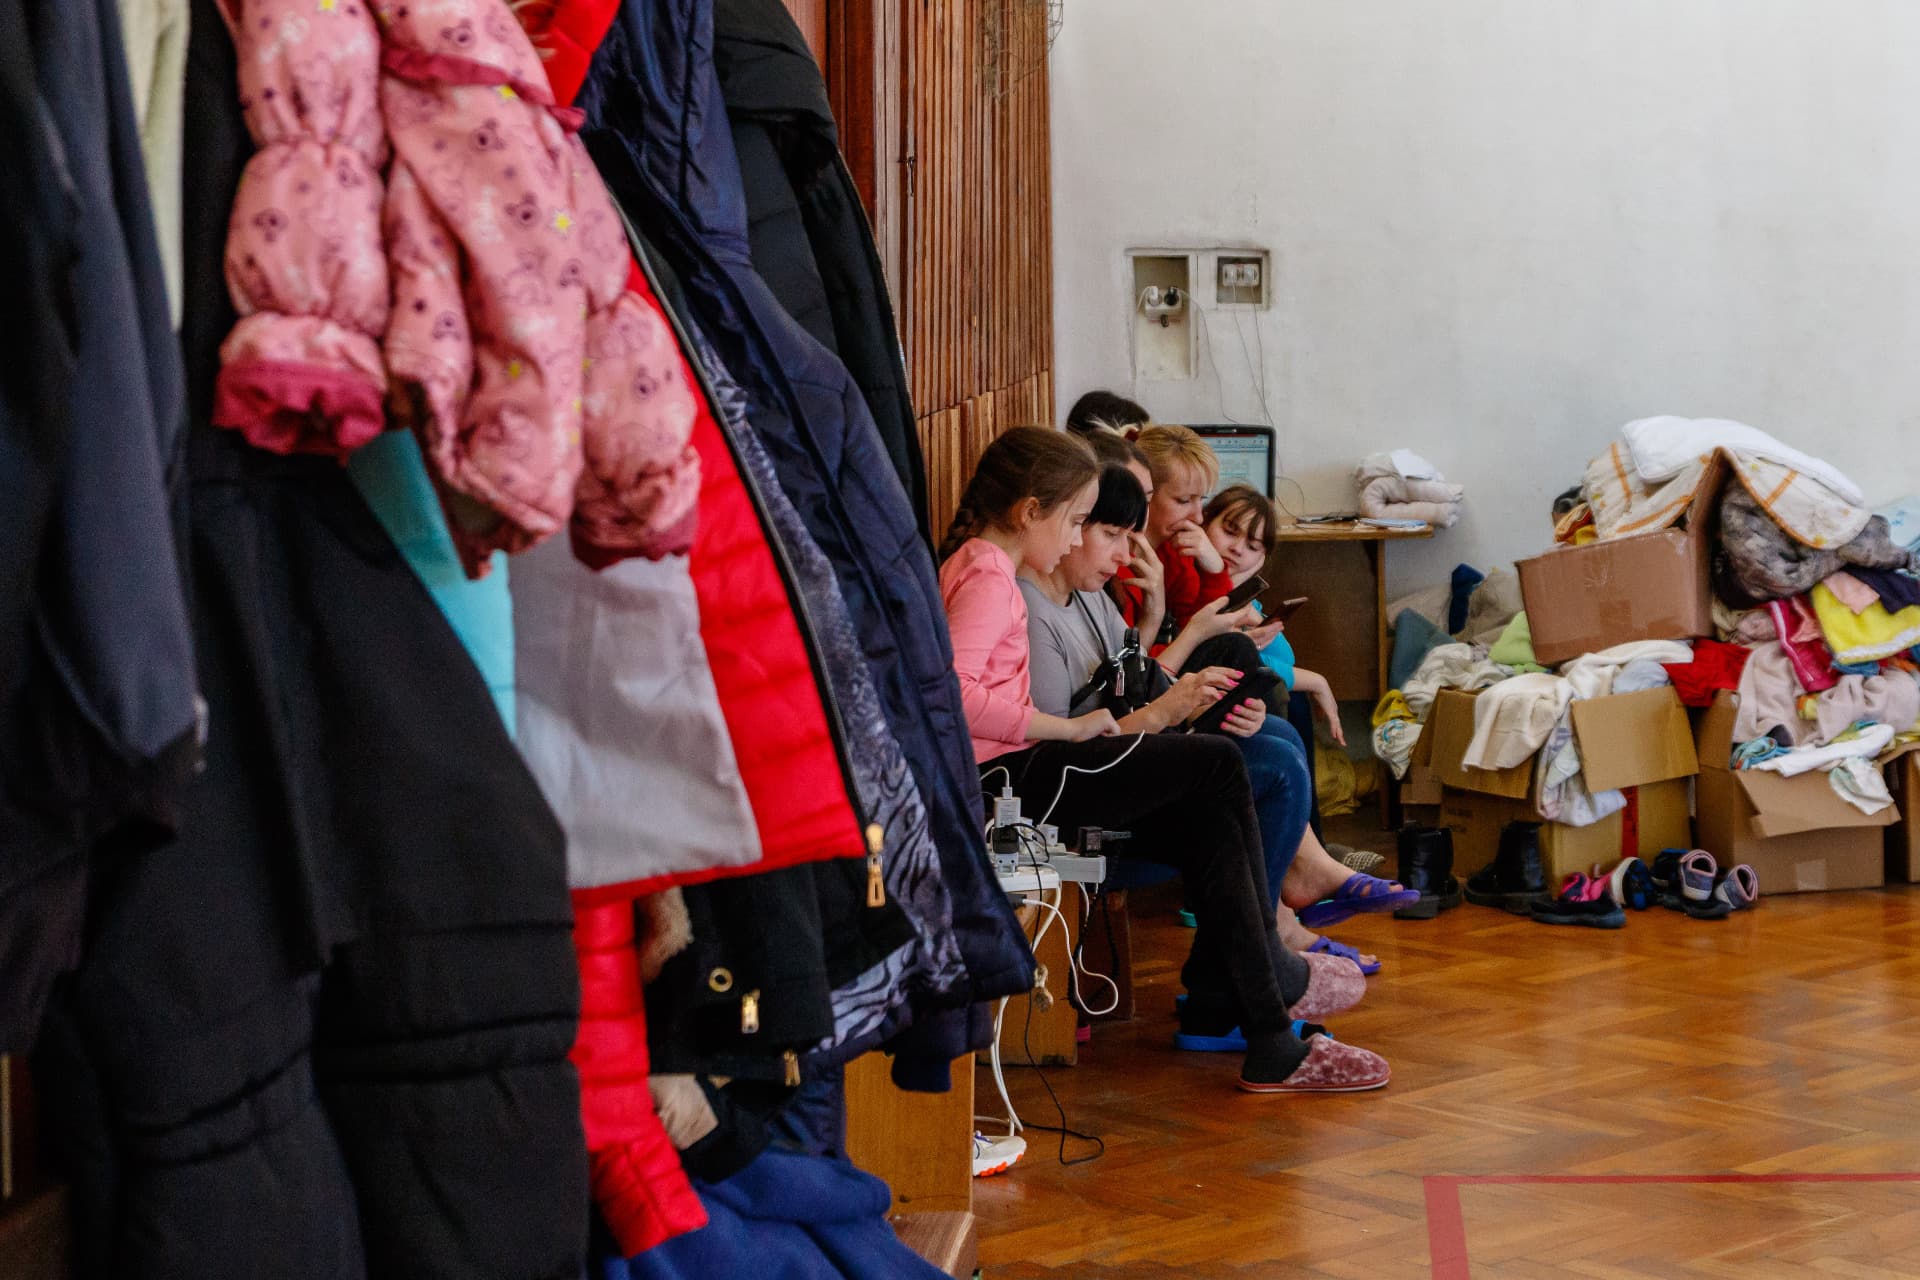 Refugees from different cities of Ukraine in the gym of one of the schools in Uzhhorod, Transcarpathian region